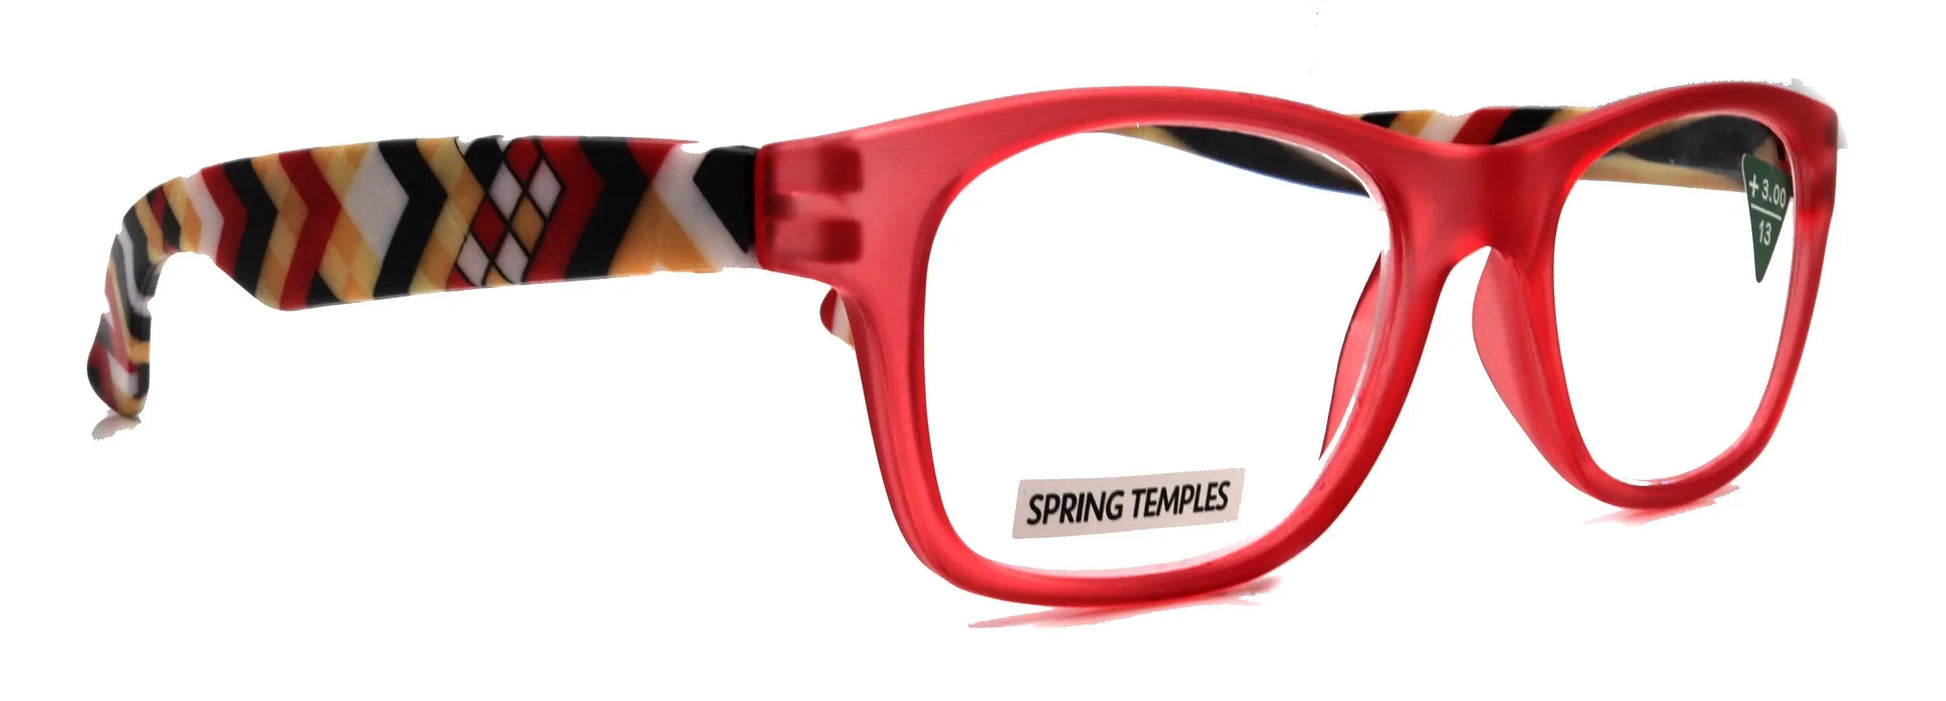 Monet, (Premium) Reading Glasses High End Readers +1..+3 Magnifying Translucent (Red) (Orange) Chevron Square Optical Frame. NY Fifth Avenue